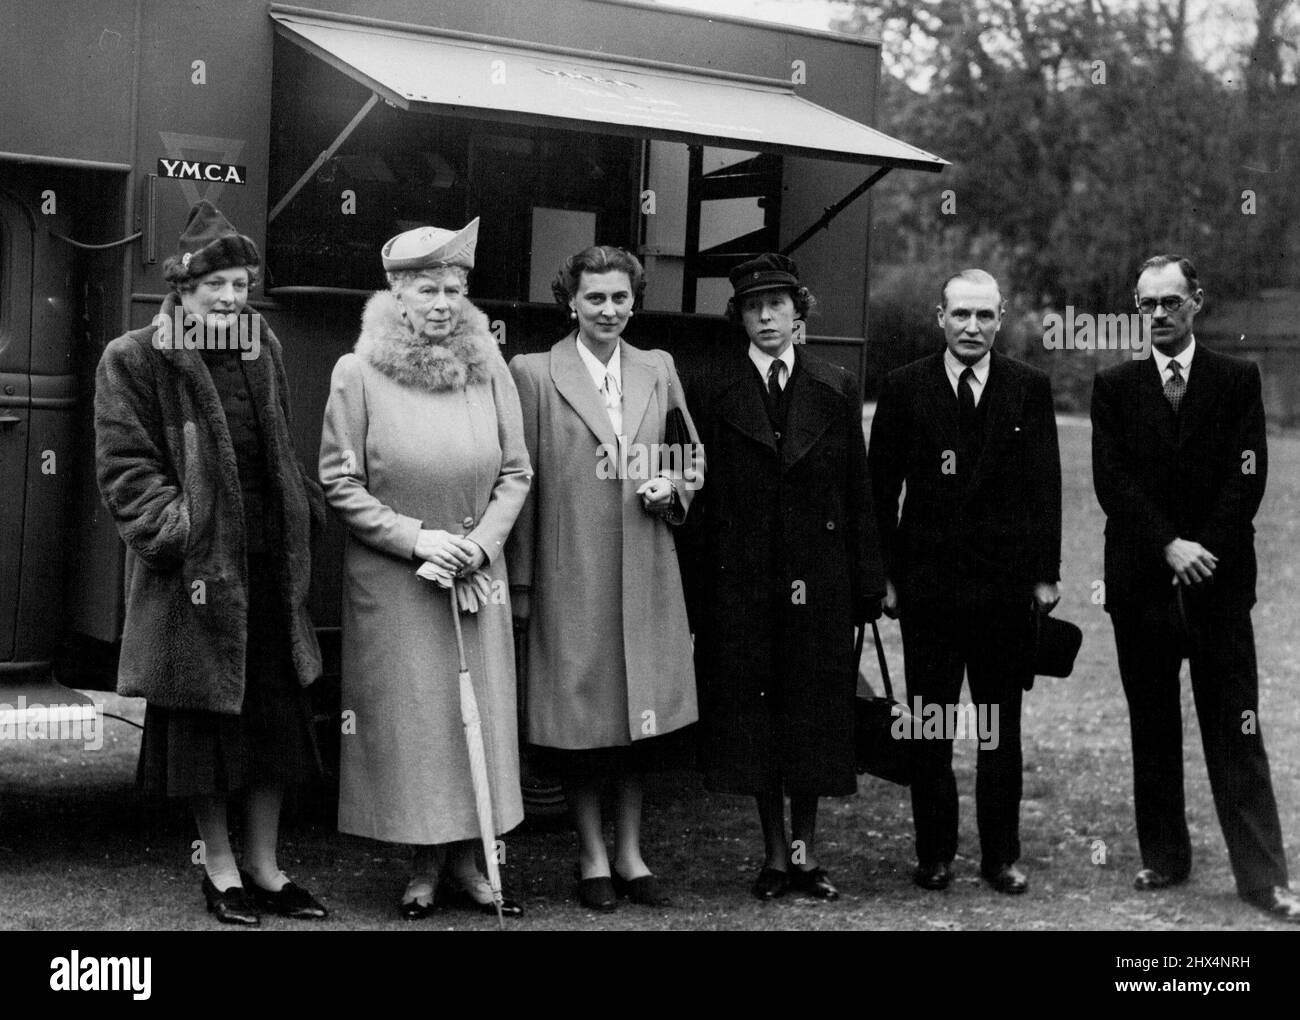 Queen Mary Sees Y.M.C.A. Mobile ExhibitionLeft to Right: - The Duchess of Edinburgh, Queen Mary, the Duchess of Kent, Lady Gunston, Mr. Derrick Gunston and Mr.E.E. Wickens.Queen Mary inspected the young men's Christian association mobile photographic exhibition and three Y.M.C.A tea wars.She was accompanied by the Duchess of Kent the ceremony marked the handing over of Tea Car No. 500 by the Duchess of Beaufort on behalf of the Credit Traders' Association. Mr. R.H. Swainson, General Secretary of the Western division accepting it on behalf of the  Y.M.C.A, said the car would be a welcome additi Stock Photo